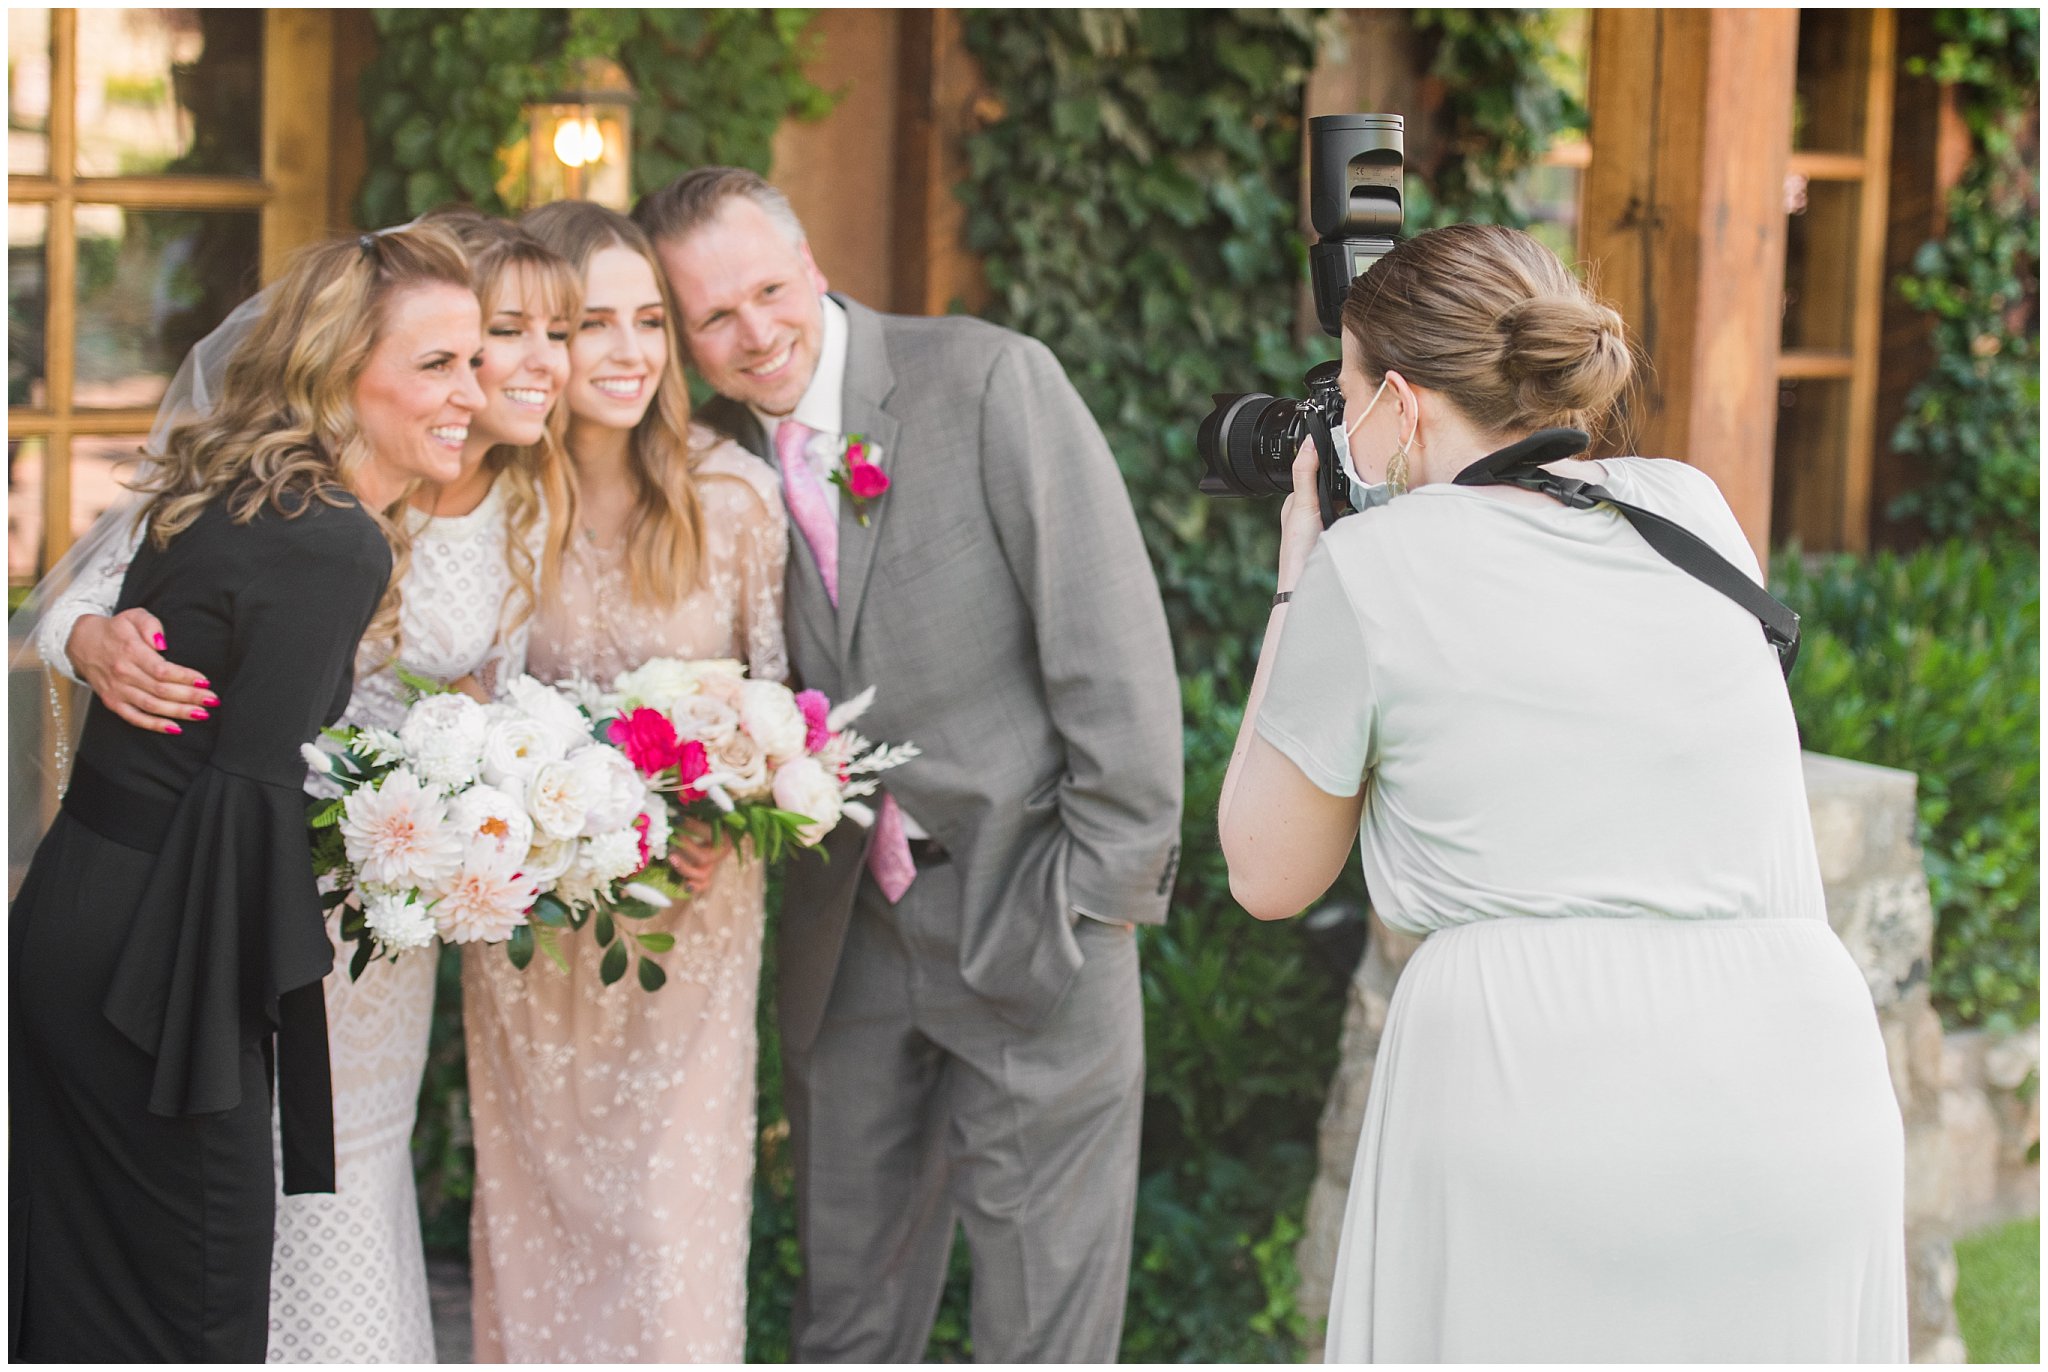 Jessie photographing family photo at wedding